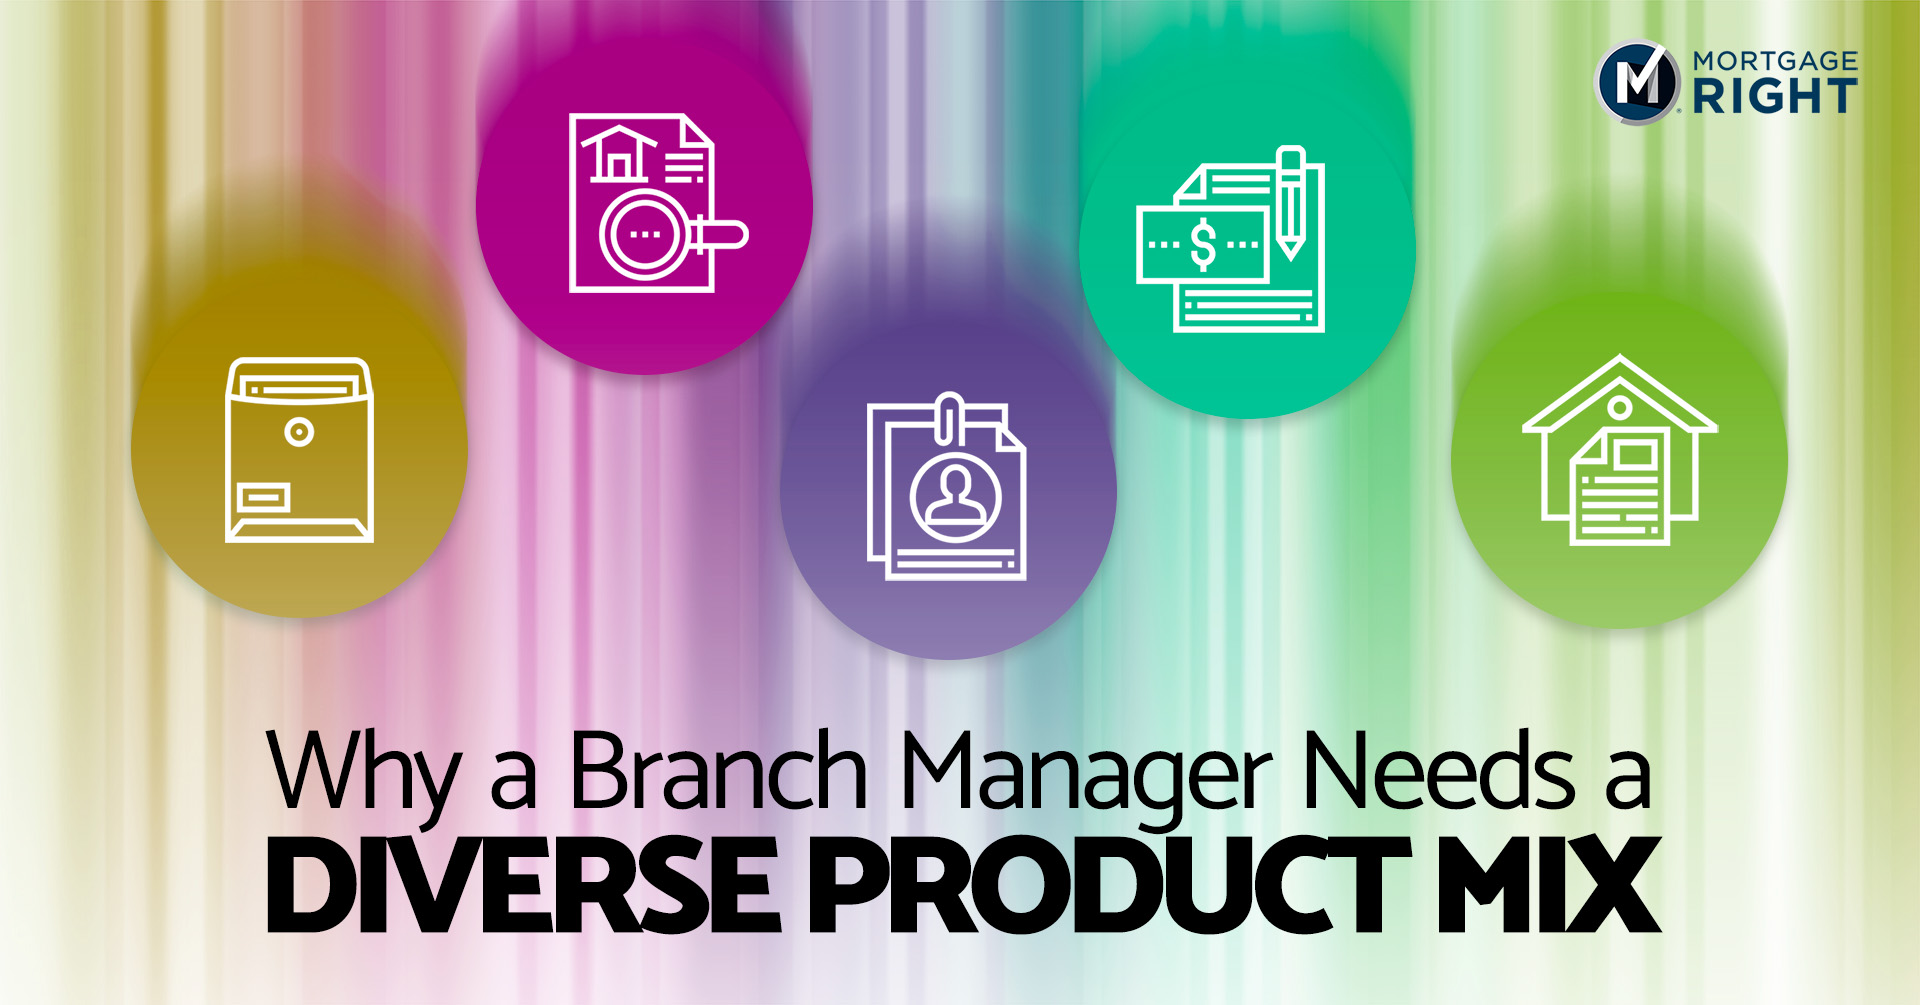 Diverse product mix for mortgage branch managers